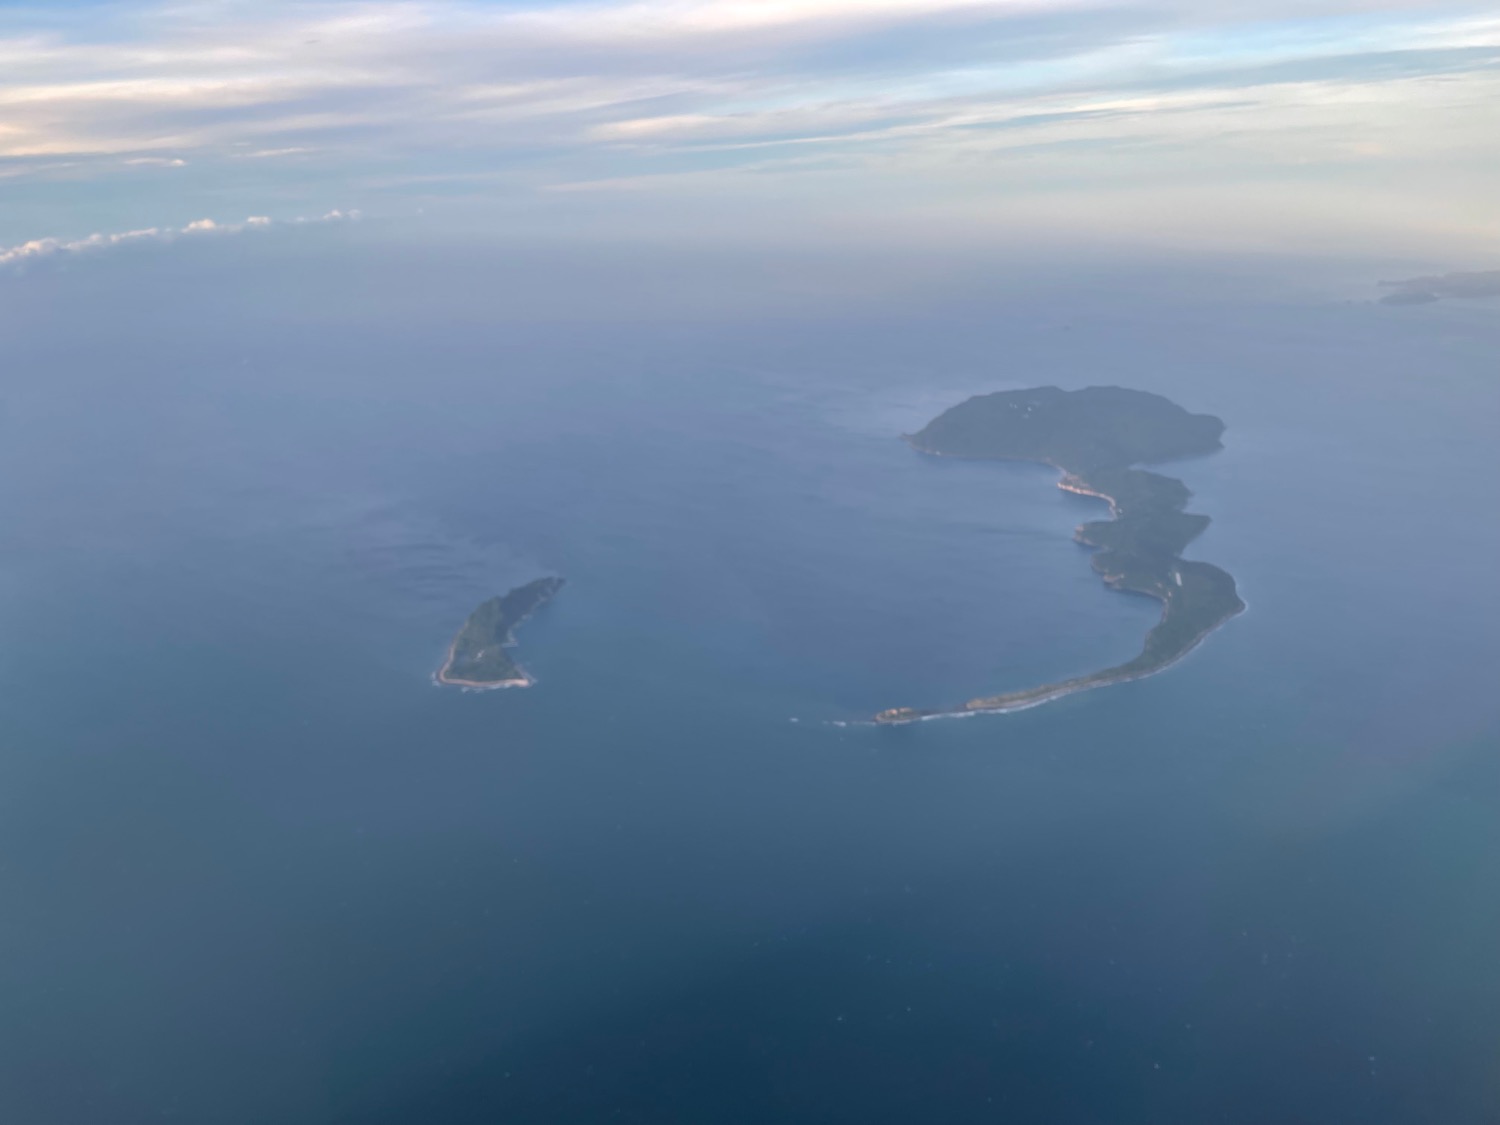 an aerial view of islands in the ocean